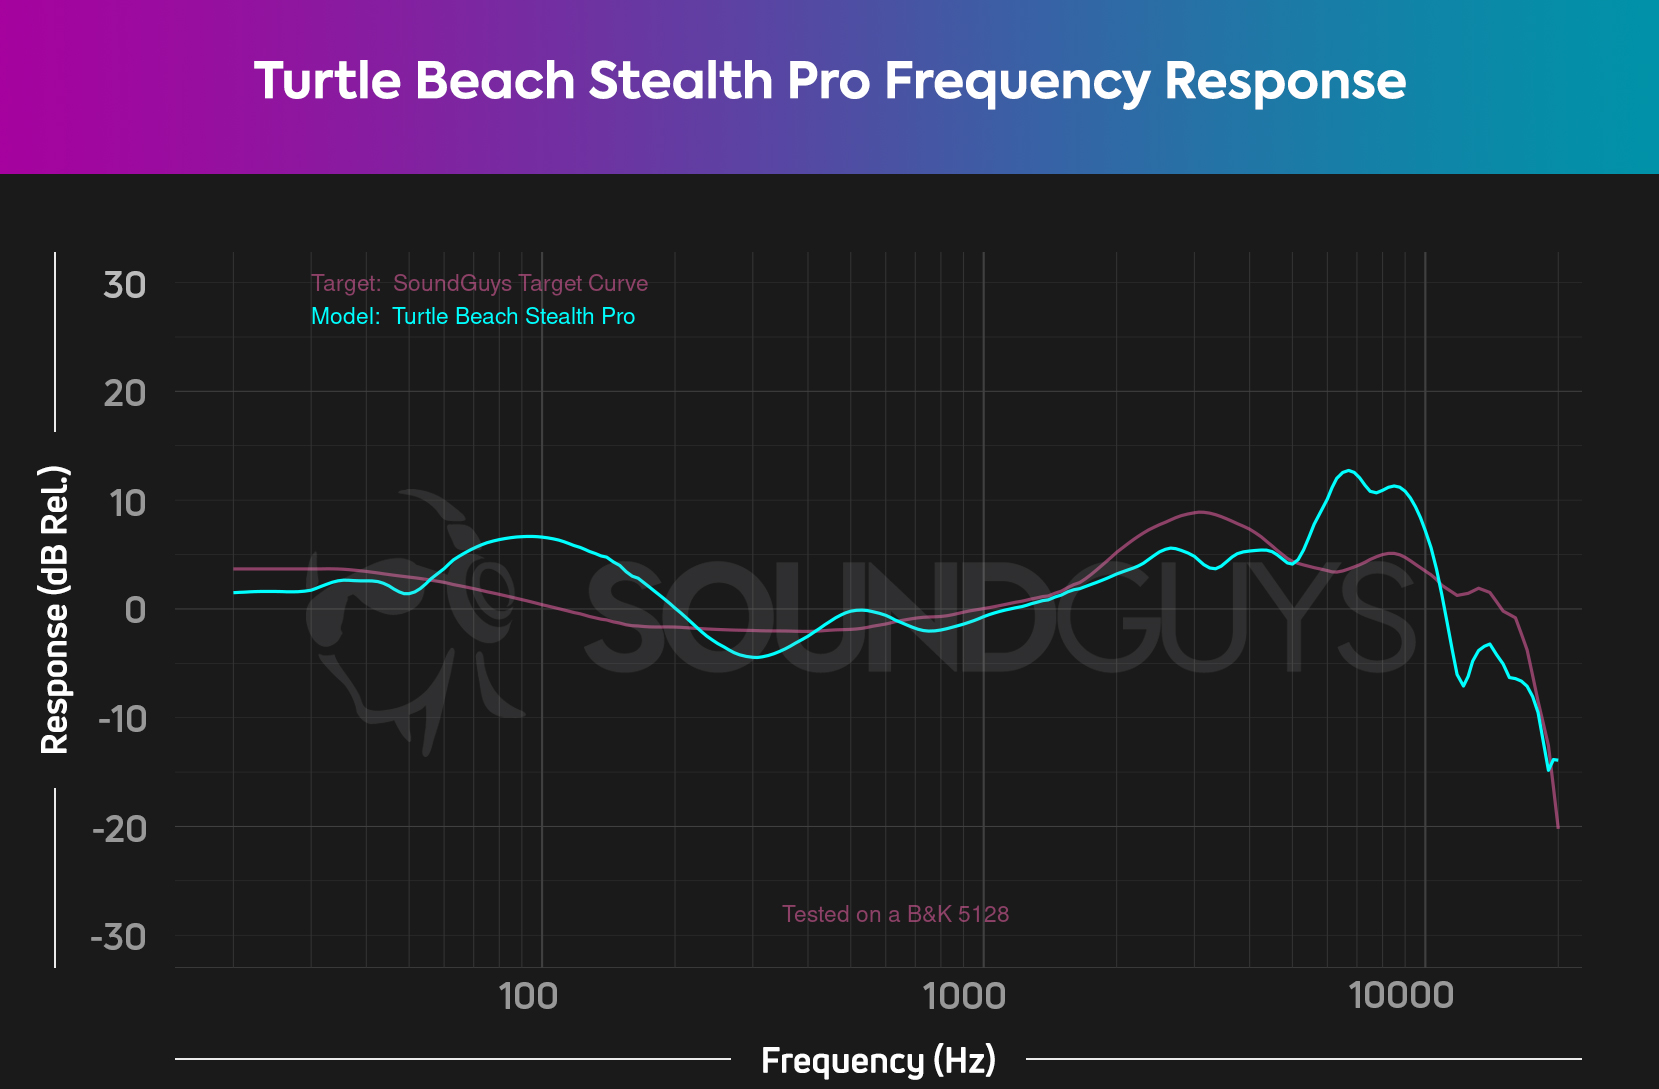 A frequency response chart for the Turtle Beach Stealth Pro gaming headset, which shows that